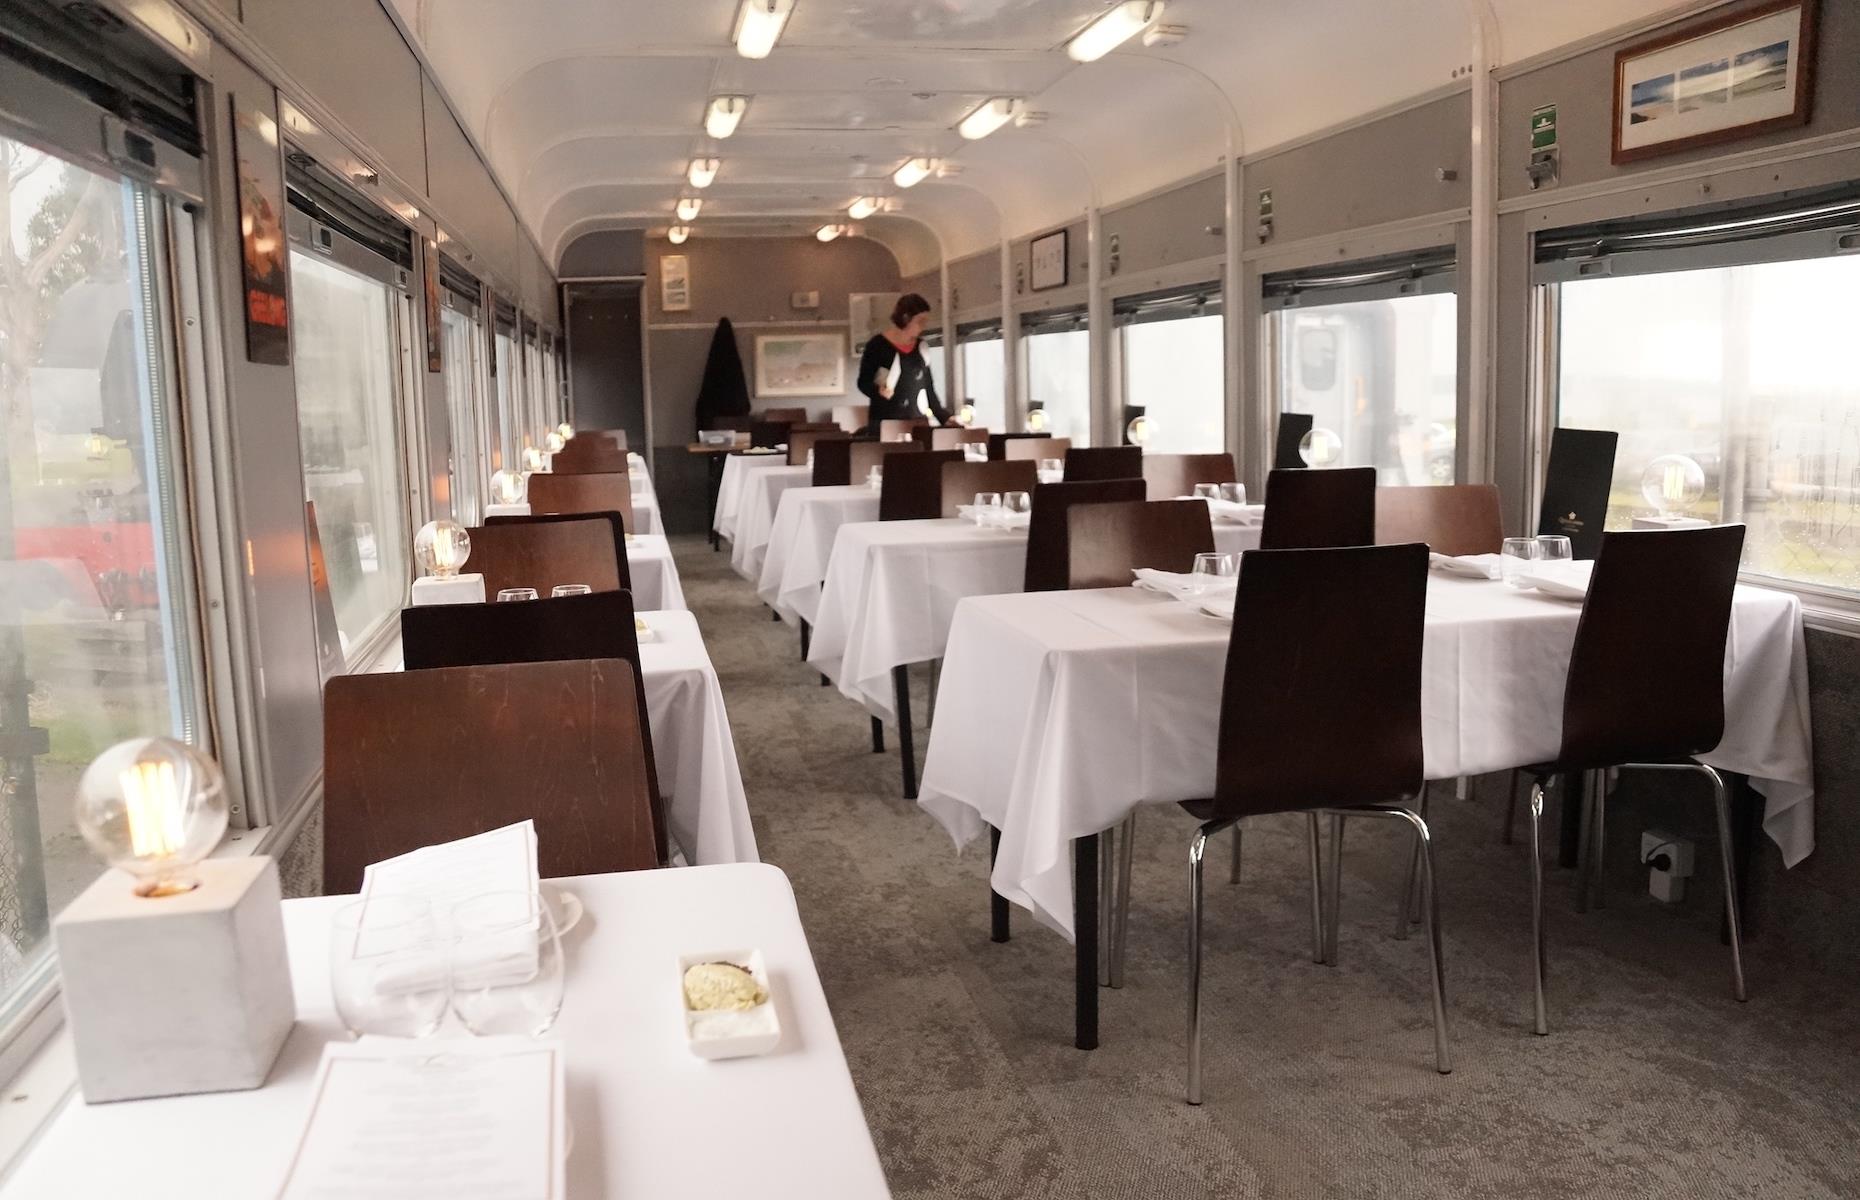 Opt for the degustation in the main dining car, which seats up to 42 passengers on tables for groups of two, four or six. Or for a more exclusive (and expensive) experience go for the private dining for two in one of its first class dining cars. Train buffs will want to book on the first weekend of each month when the steam locomotive 3620 pulls the Q Train.